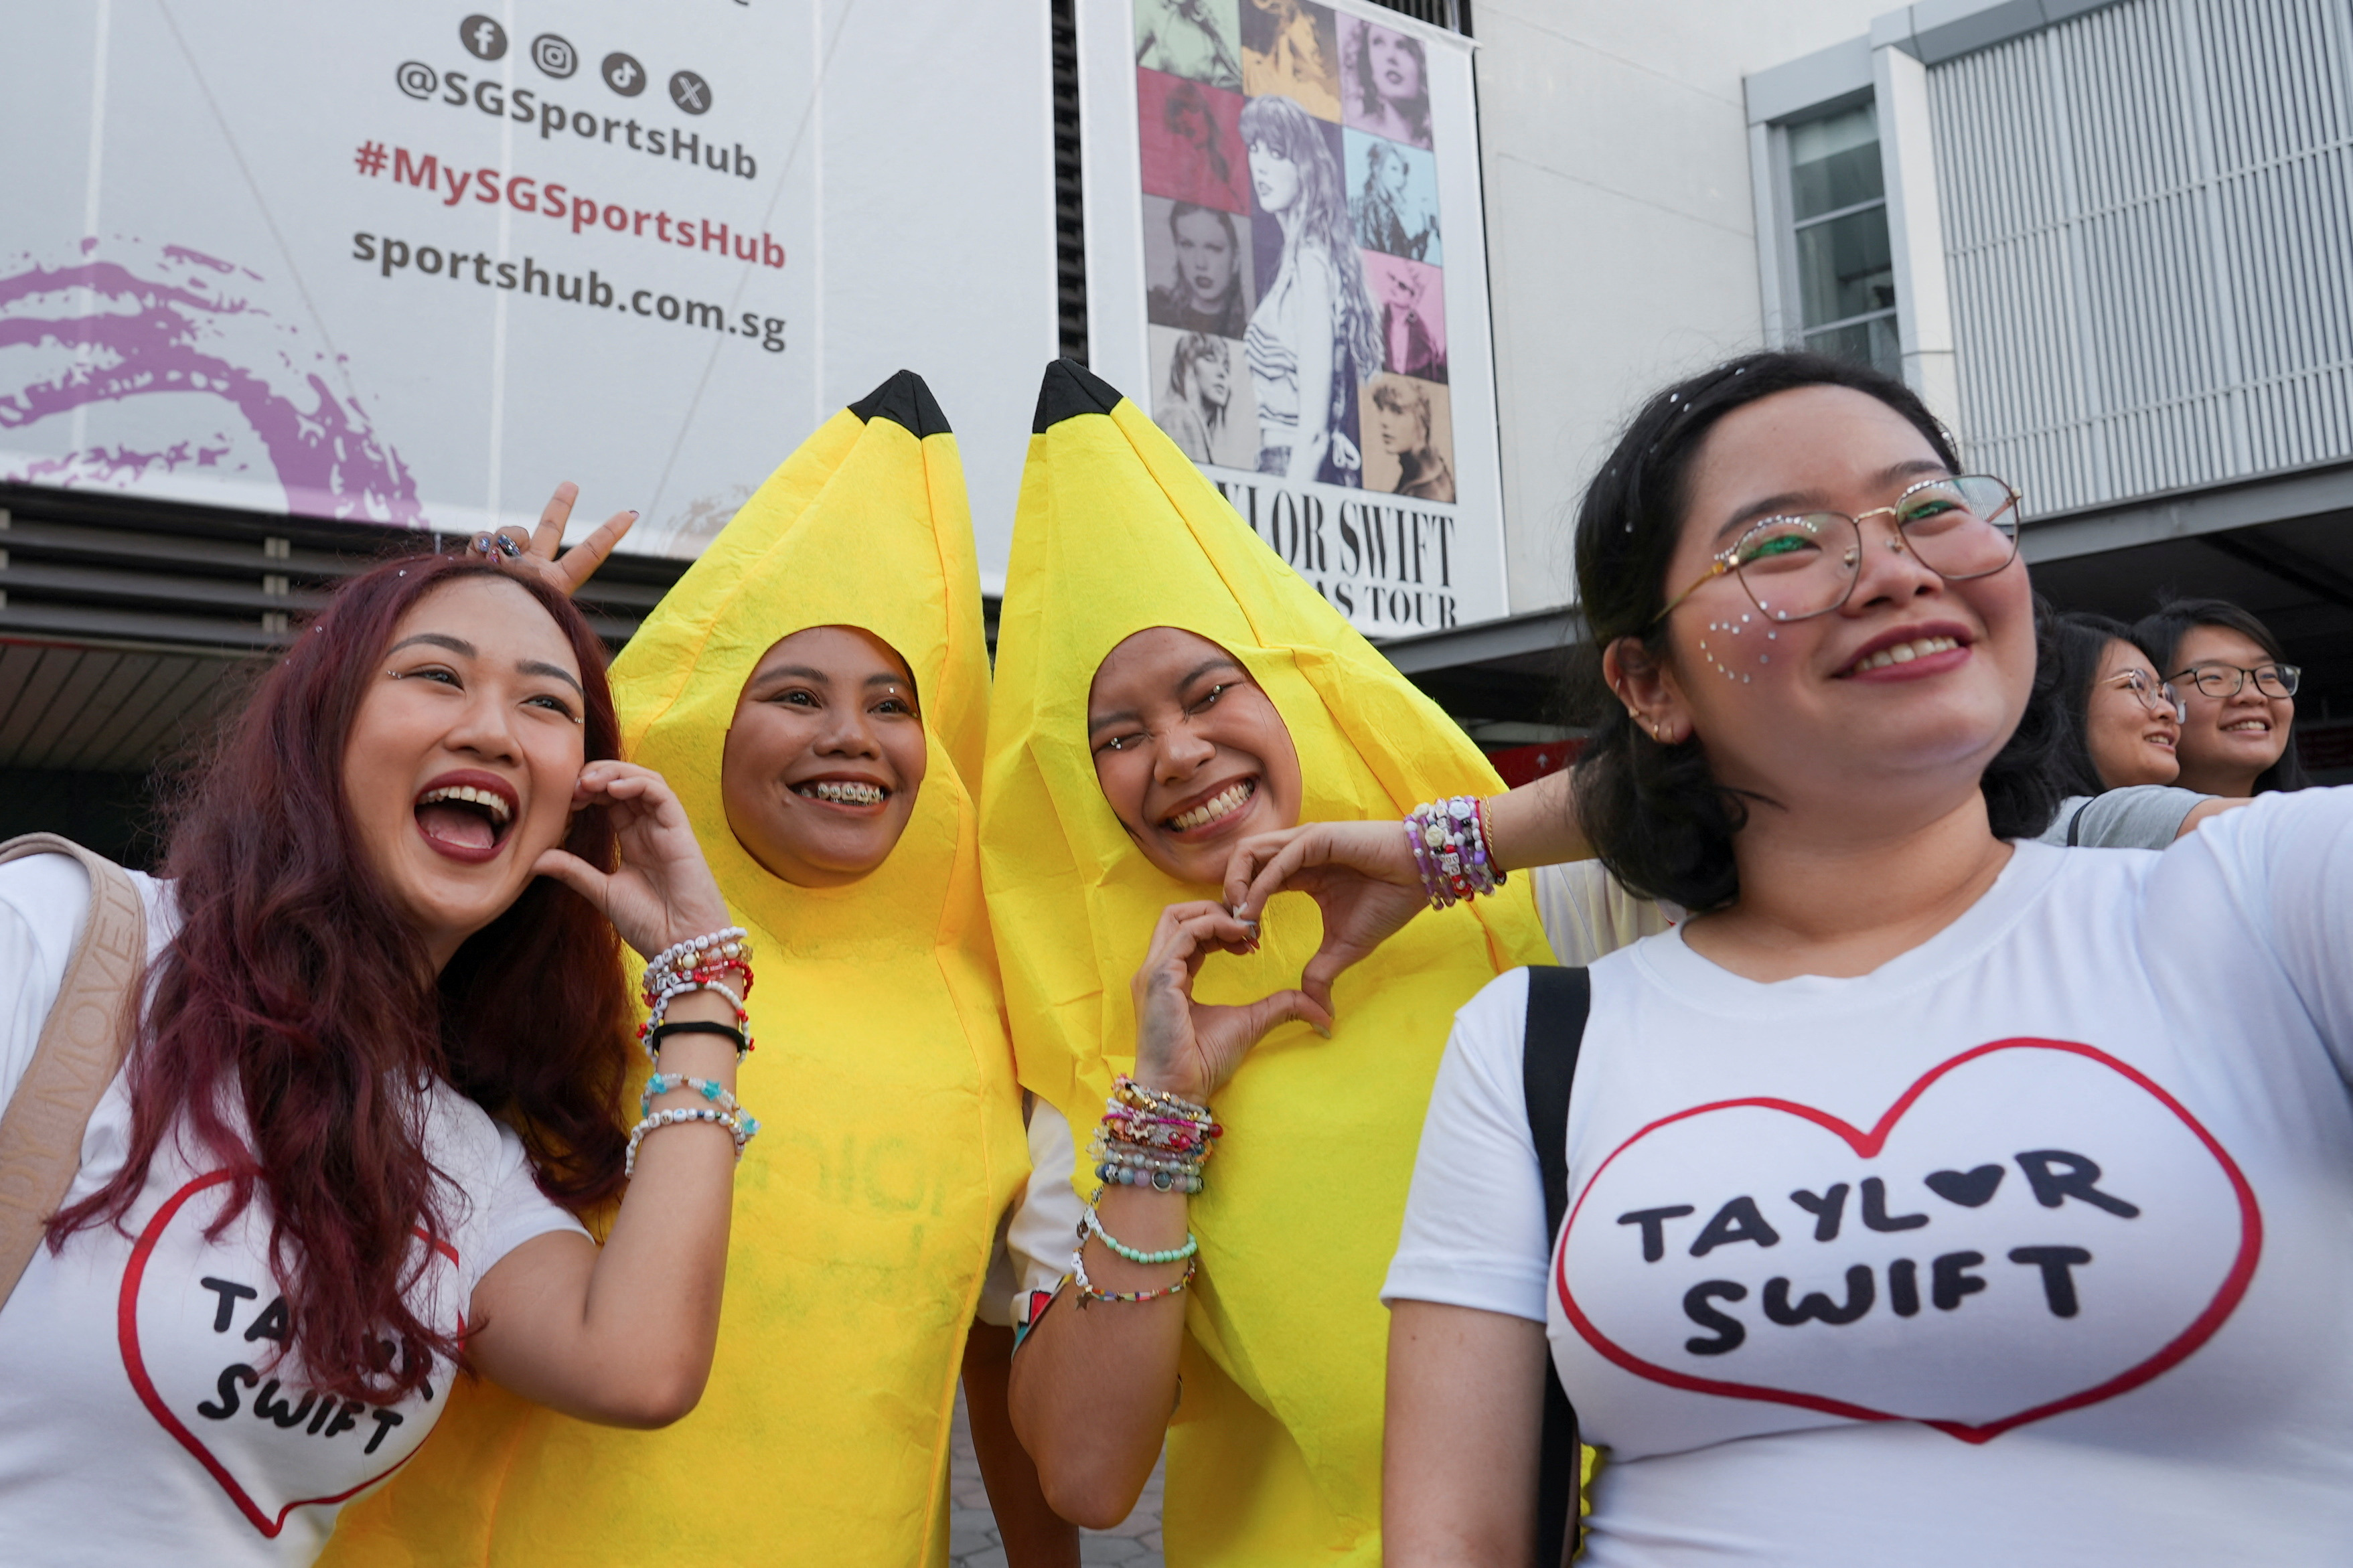 Filipina 'Swiftie' Charlyn Suizo poses for a selfie with other fans before a Taylor Swift concert, outside National Stadium in Singapore